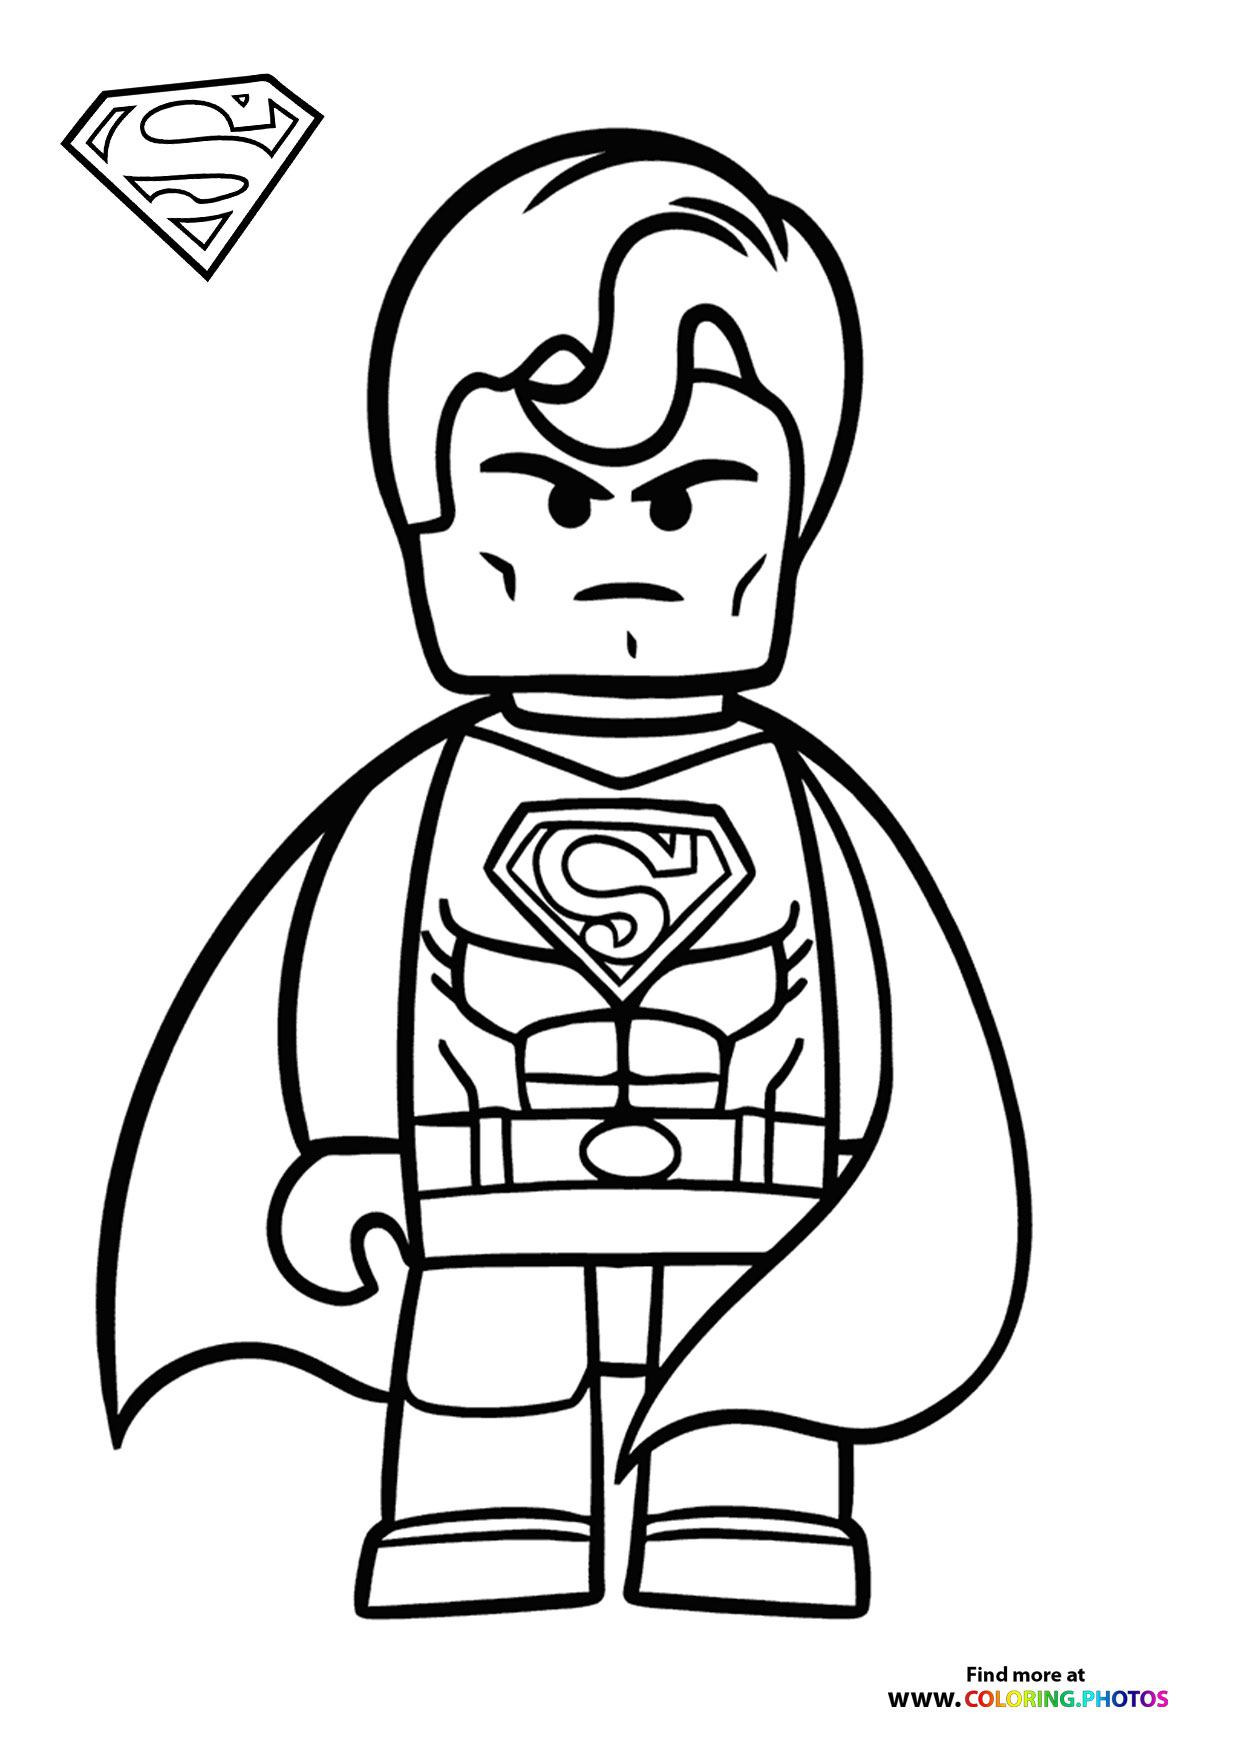 Lego Superman   Coloring Pages for kids